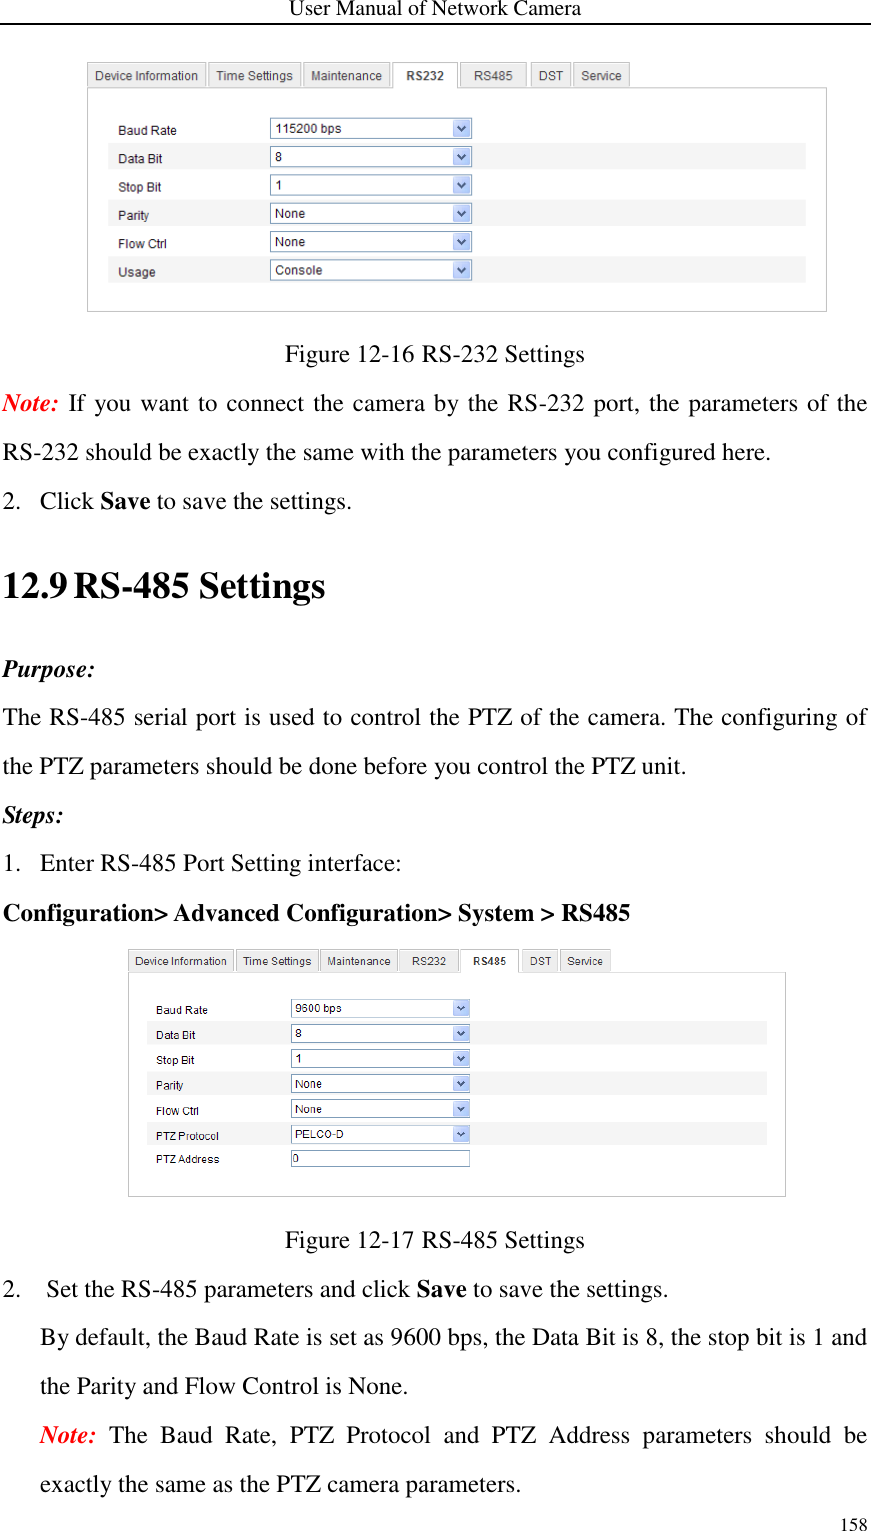 User Manual of Network Camera 158   Figure 12-16 RS-232 Settings Note: If you want to connect the camera by the RS-232 port, the parameters of the RS-232 should be exactly the same with the parameters you configured here. 2. Click Save to save the settings. 12.9 RS-485 Settings Purpose: The RS-485 serial port is used to control the PTZ of the camera. The configuring of the PTZ parameters should be done before you control the PTZ unit. Steps: 1. Enter RS-485 Port Setting interface: Configuration&gt; Advanced Configuration&gt; System &gt; RS485    Figure 12-17 RS-485 Settings 2. Set the RS-485 parameters and click Save to save the settings. By default, the Baud Rate is set as 9600 bps, the Data Bit is 8, the stop bit is 1 and the Parity and Flow Control is None. Note:  The  Baud  Rate,  PTZ  Protocol  and  PTZ  Address  parameters  should  be exactly the same as the PTZ camera parameters. 